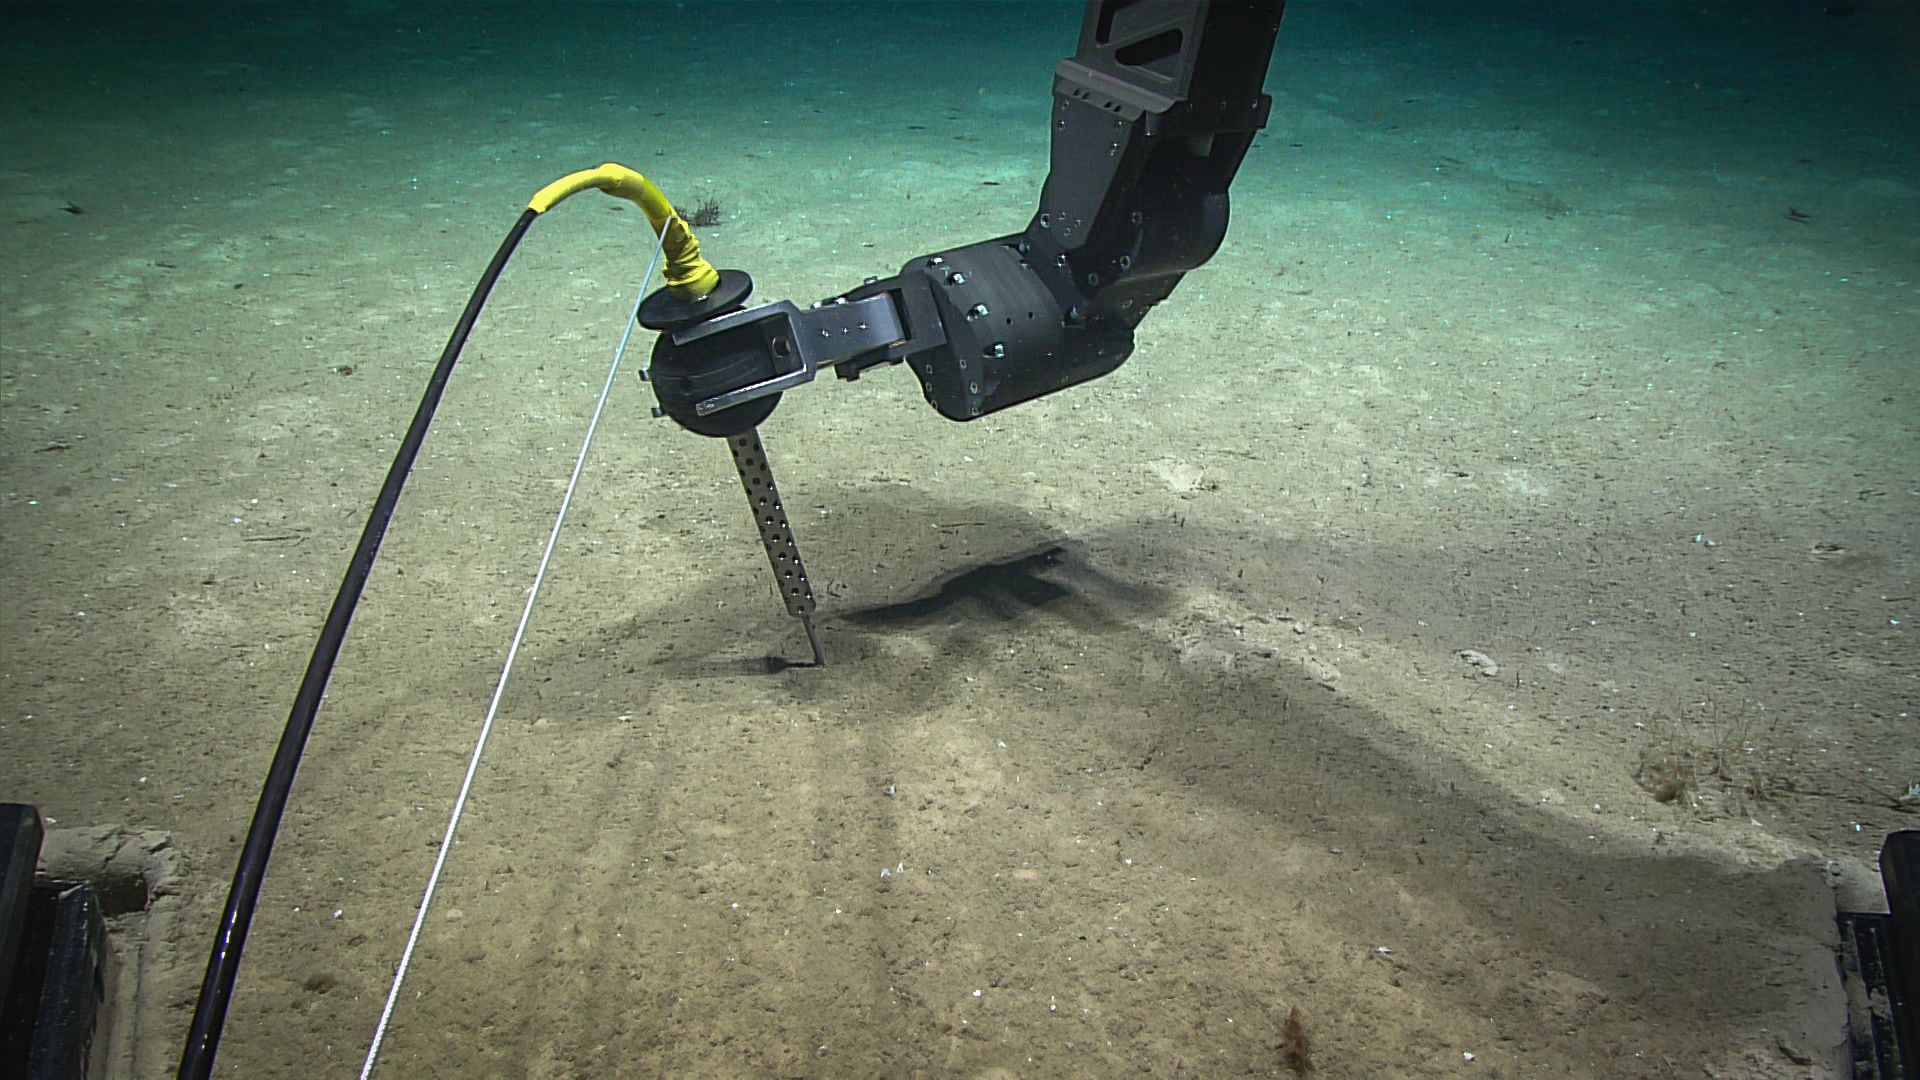 During Dive 03 of the 2022 ROV and Mapping Shakedown, remotely operated vehicle (ROV) pilots practiced with and tested ROV Deep Discoverer’s manipulator arm and temperature probe. We use the temperature probe to learn more about the biology and chemistry of the deep-sea environment, especially around hydrothermal vents, brine pools, and where hot water may be escaping from the seafloor.